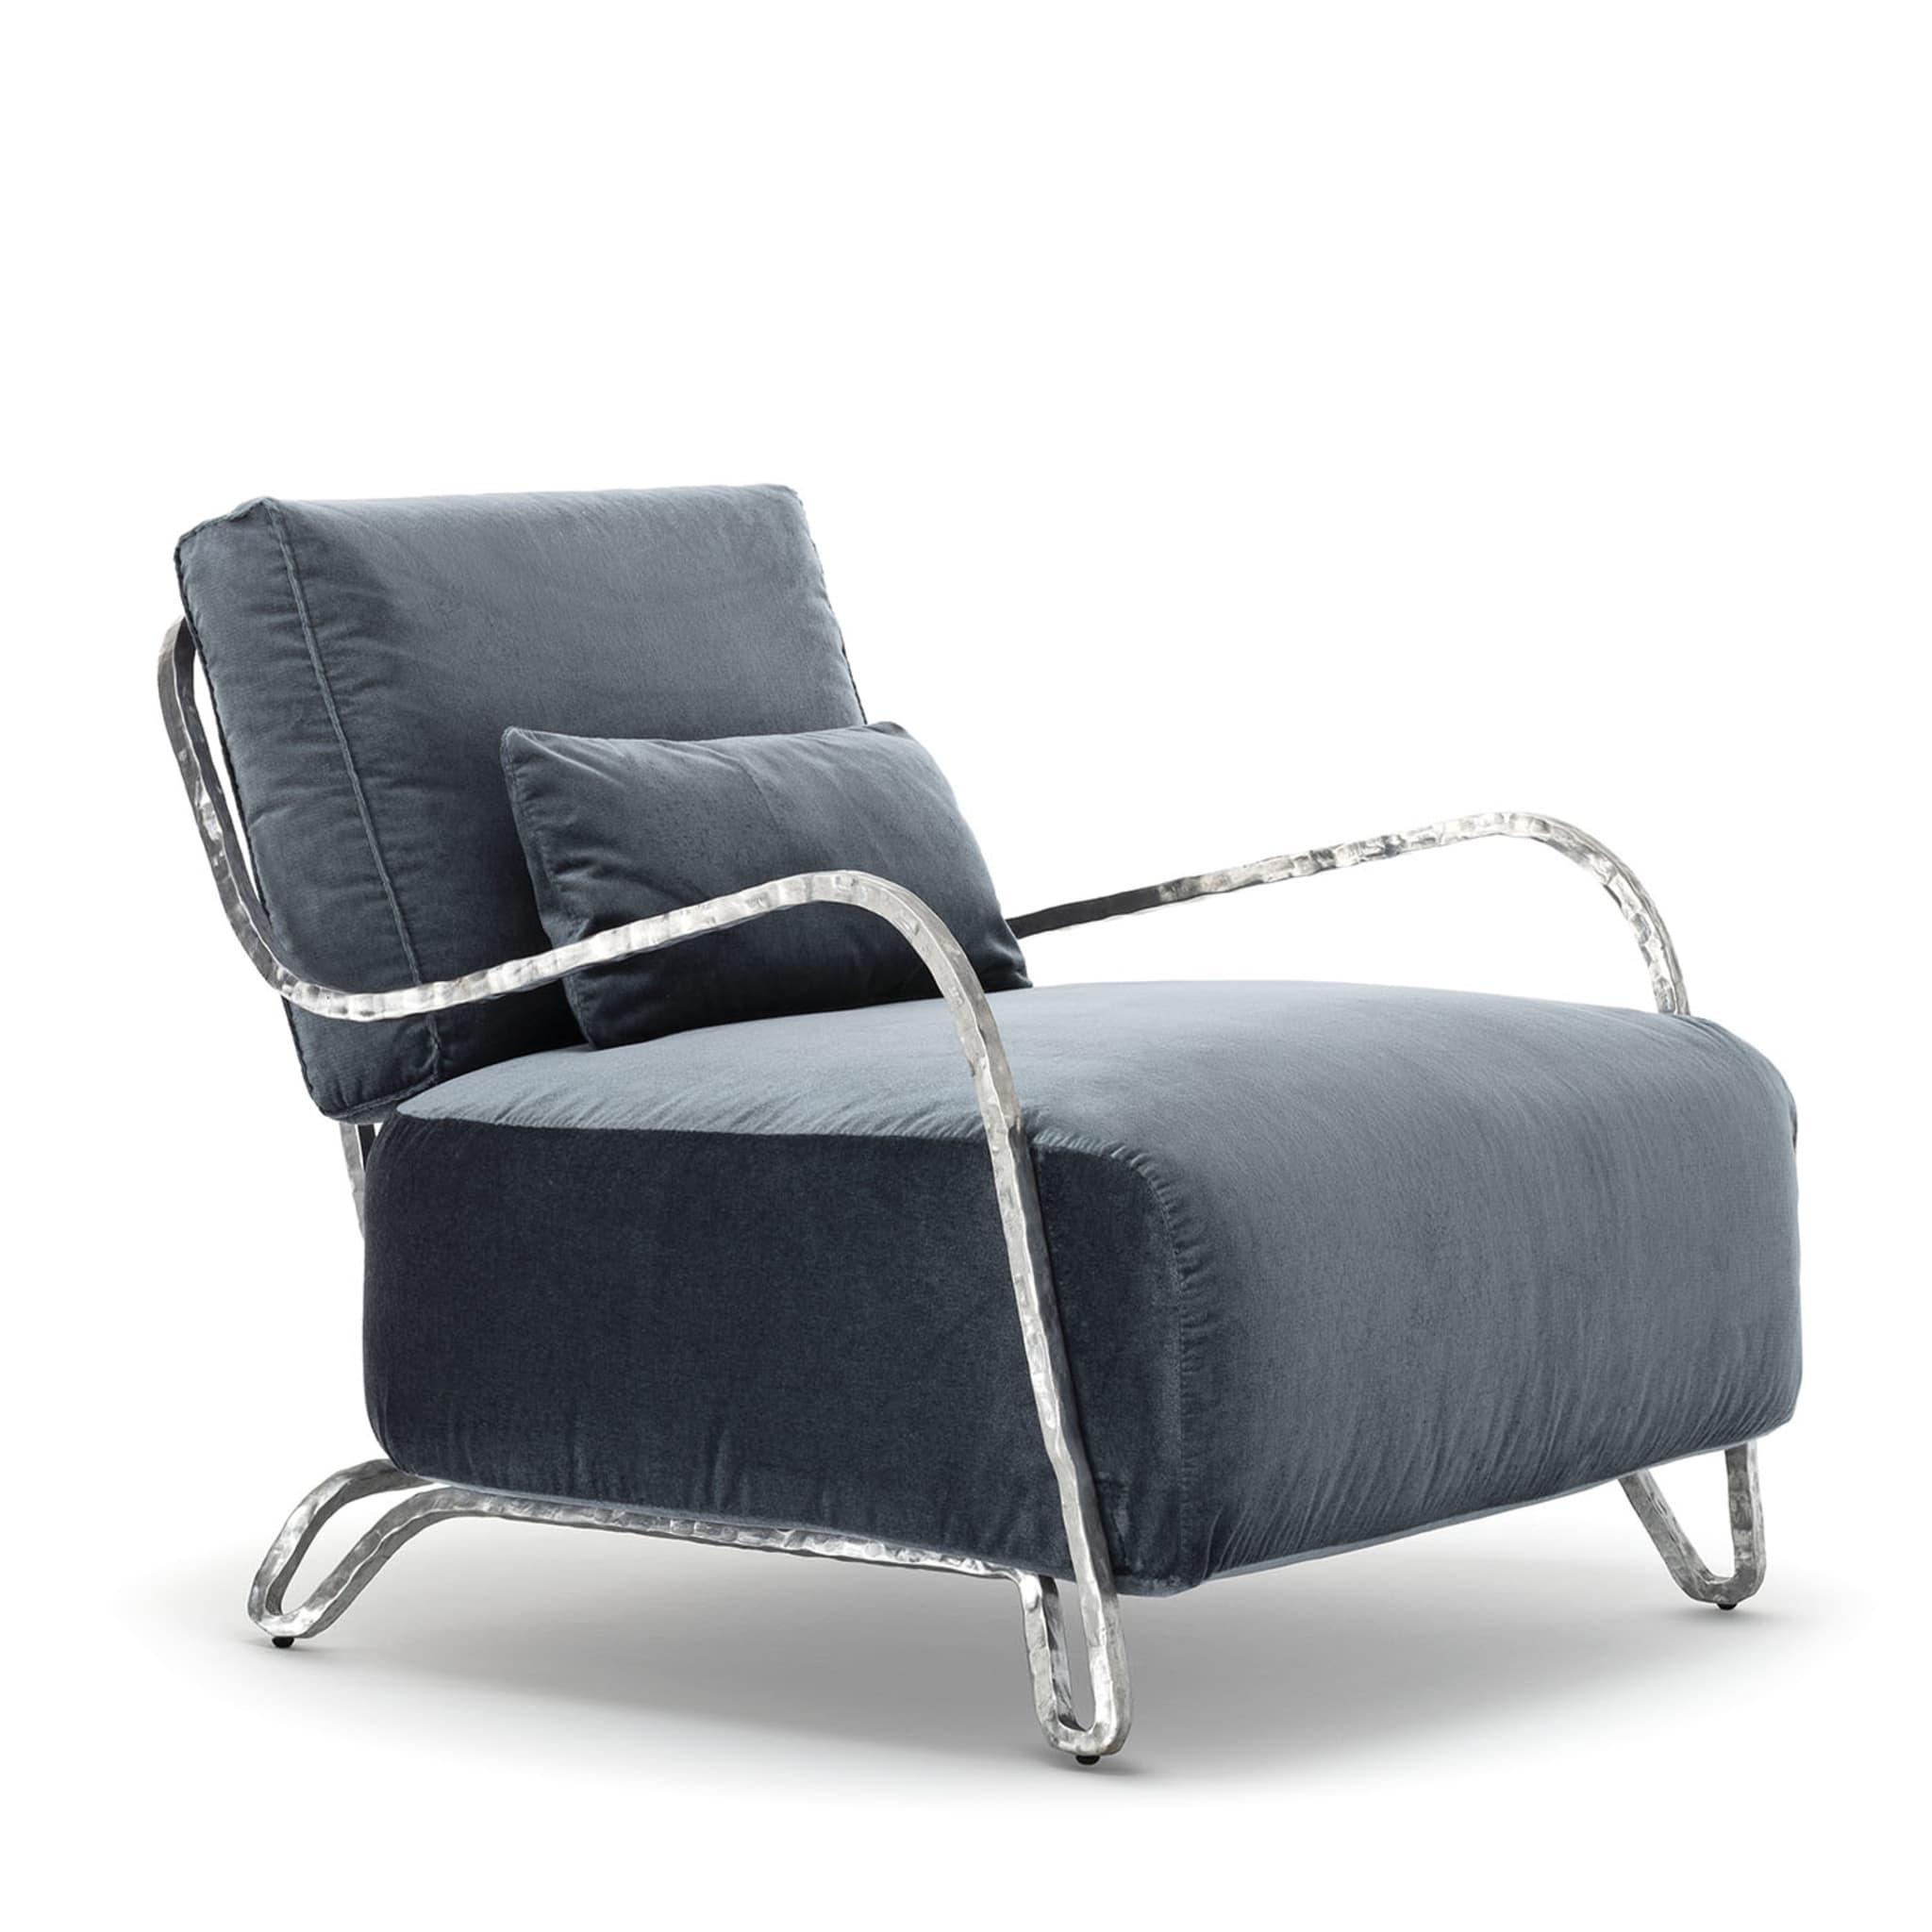 Moonlight Blue and Silver Low Armchair - Alternative view 1